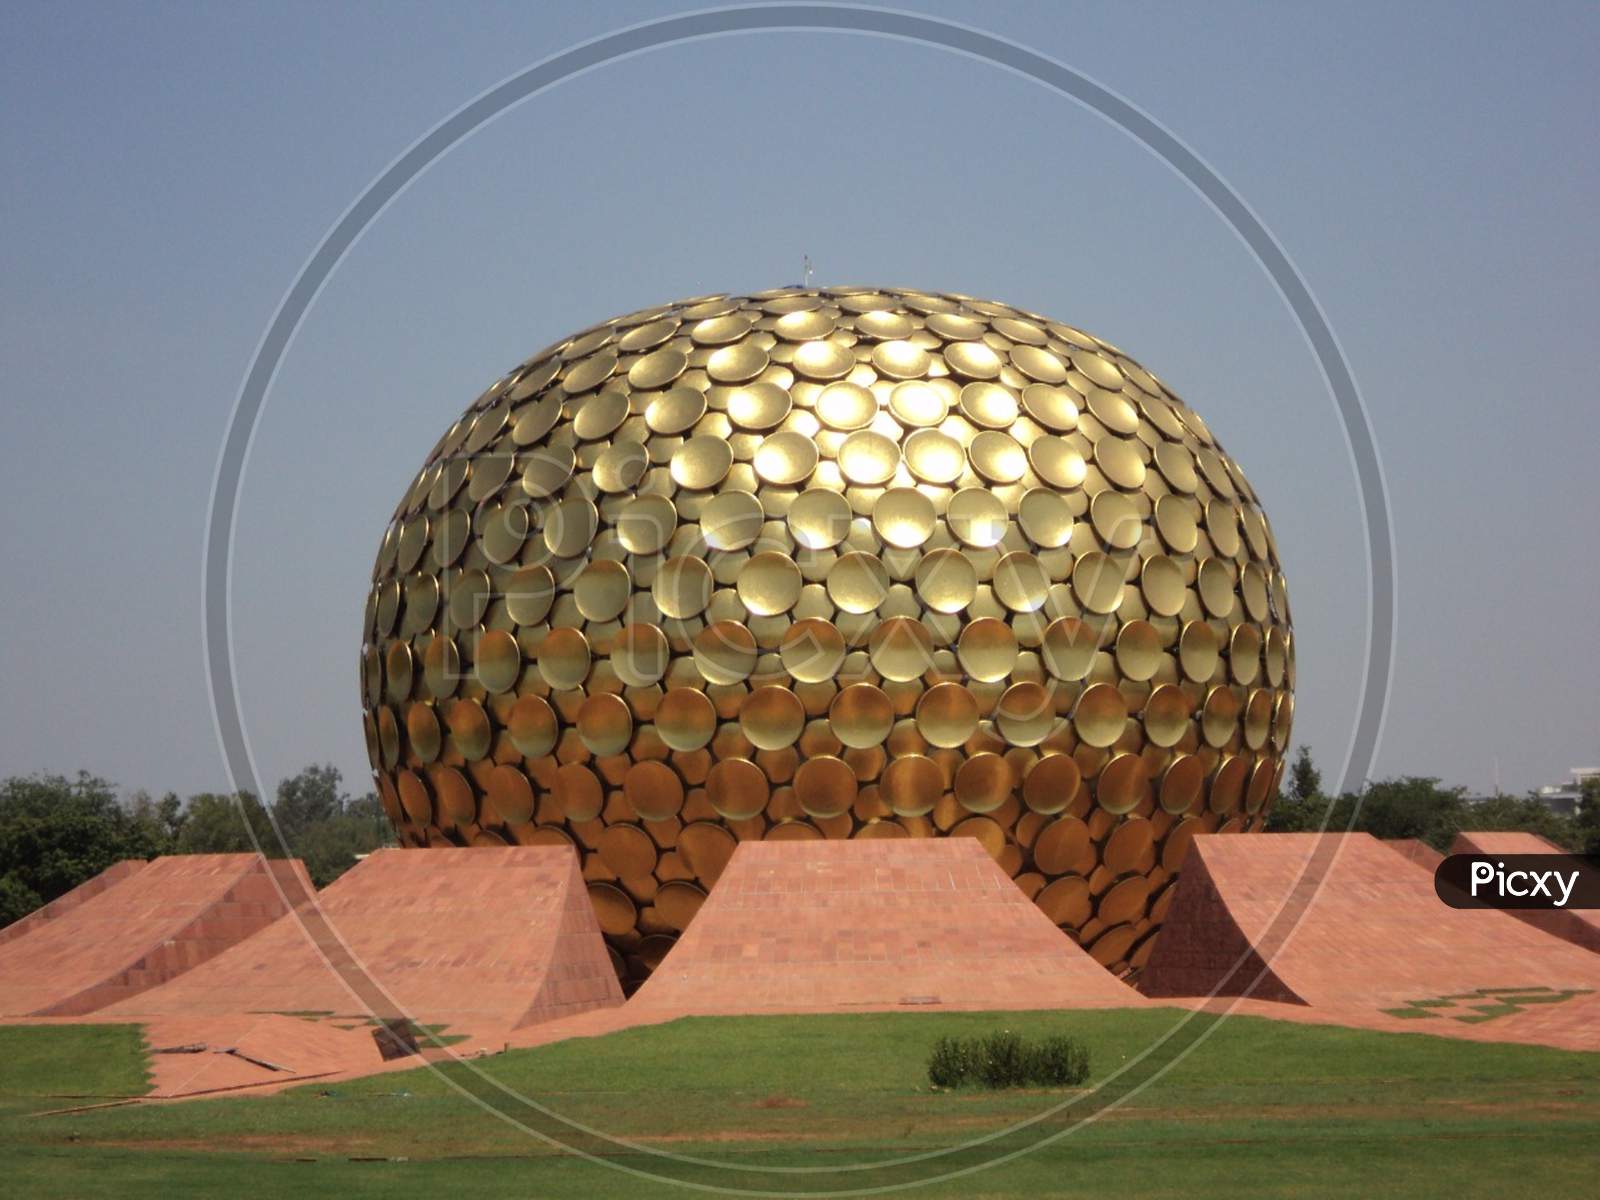 Auroville at pondicherry.Its a Editorial Photo don't use it as a commercial photo.